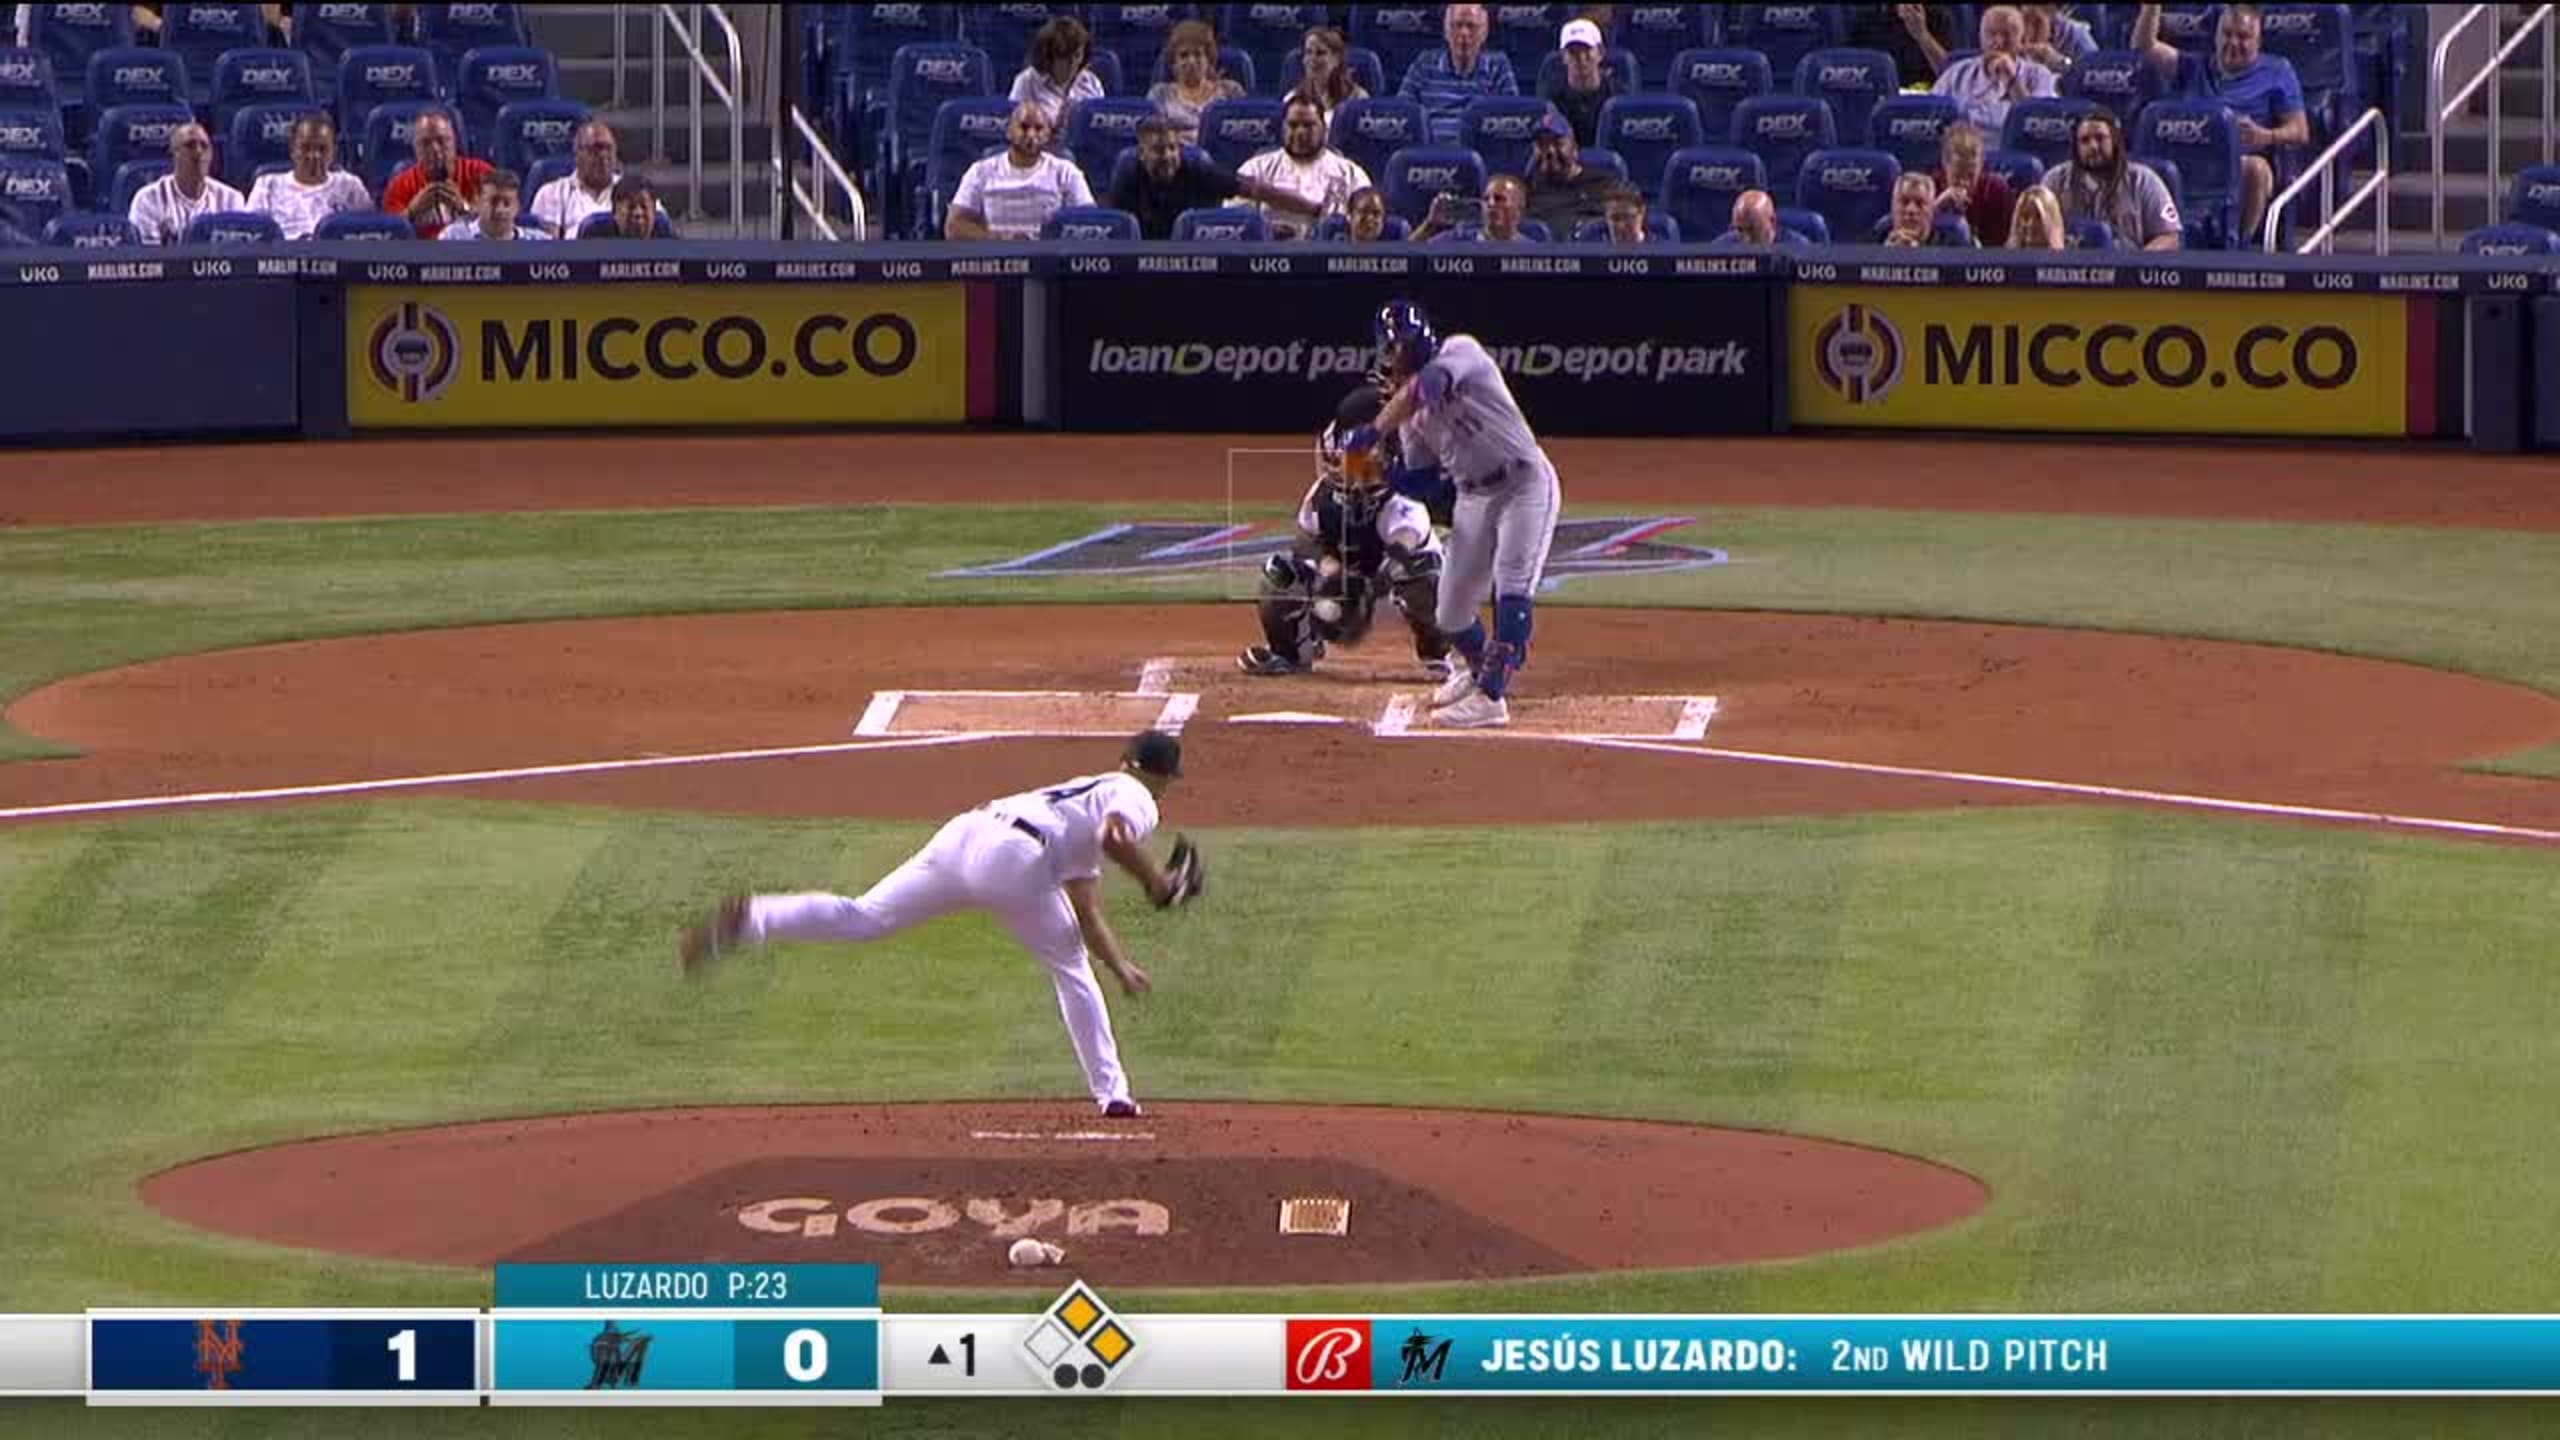 Soler slugs his 33rd HR, Luzardo works 6 strong innings as the Marlins  blanked the Padres 3-0 - ABC News